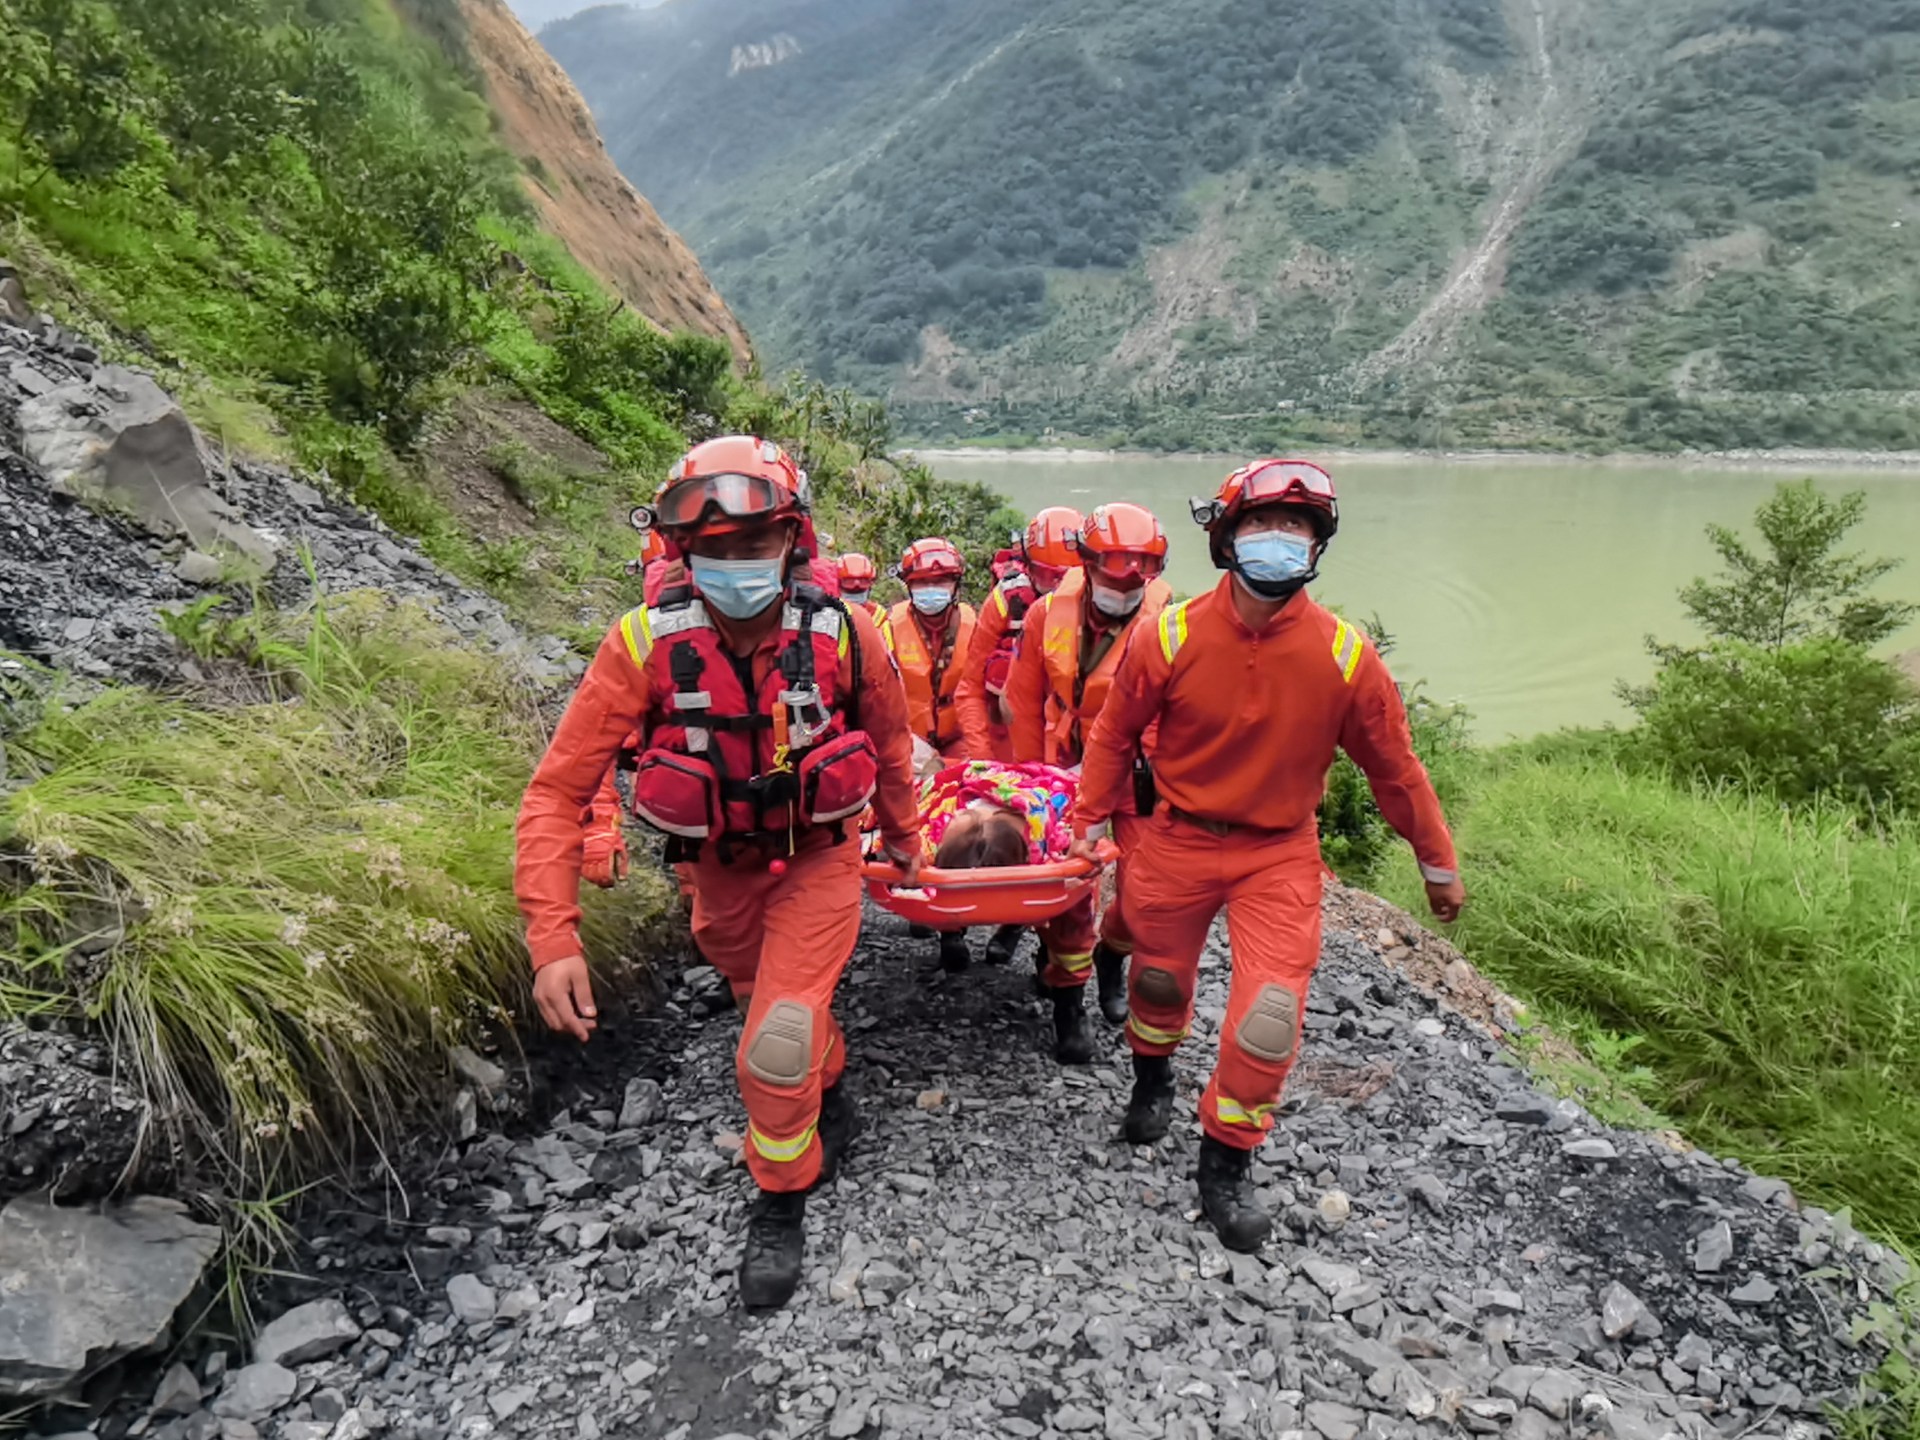 Rain and floods hamper earthquake rescue mission in China